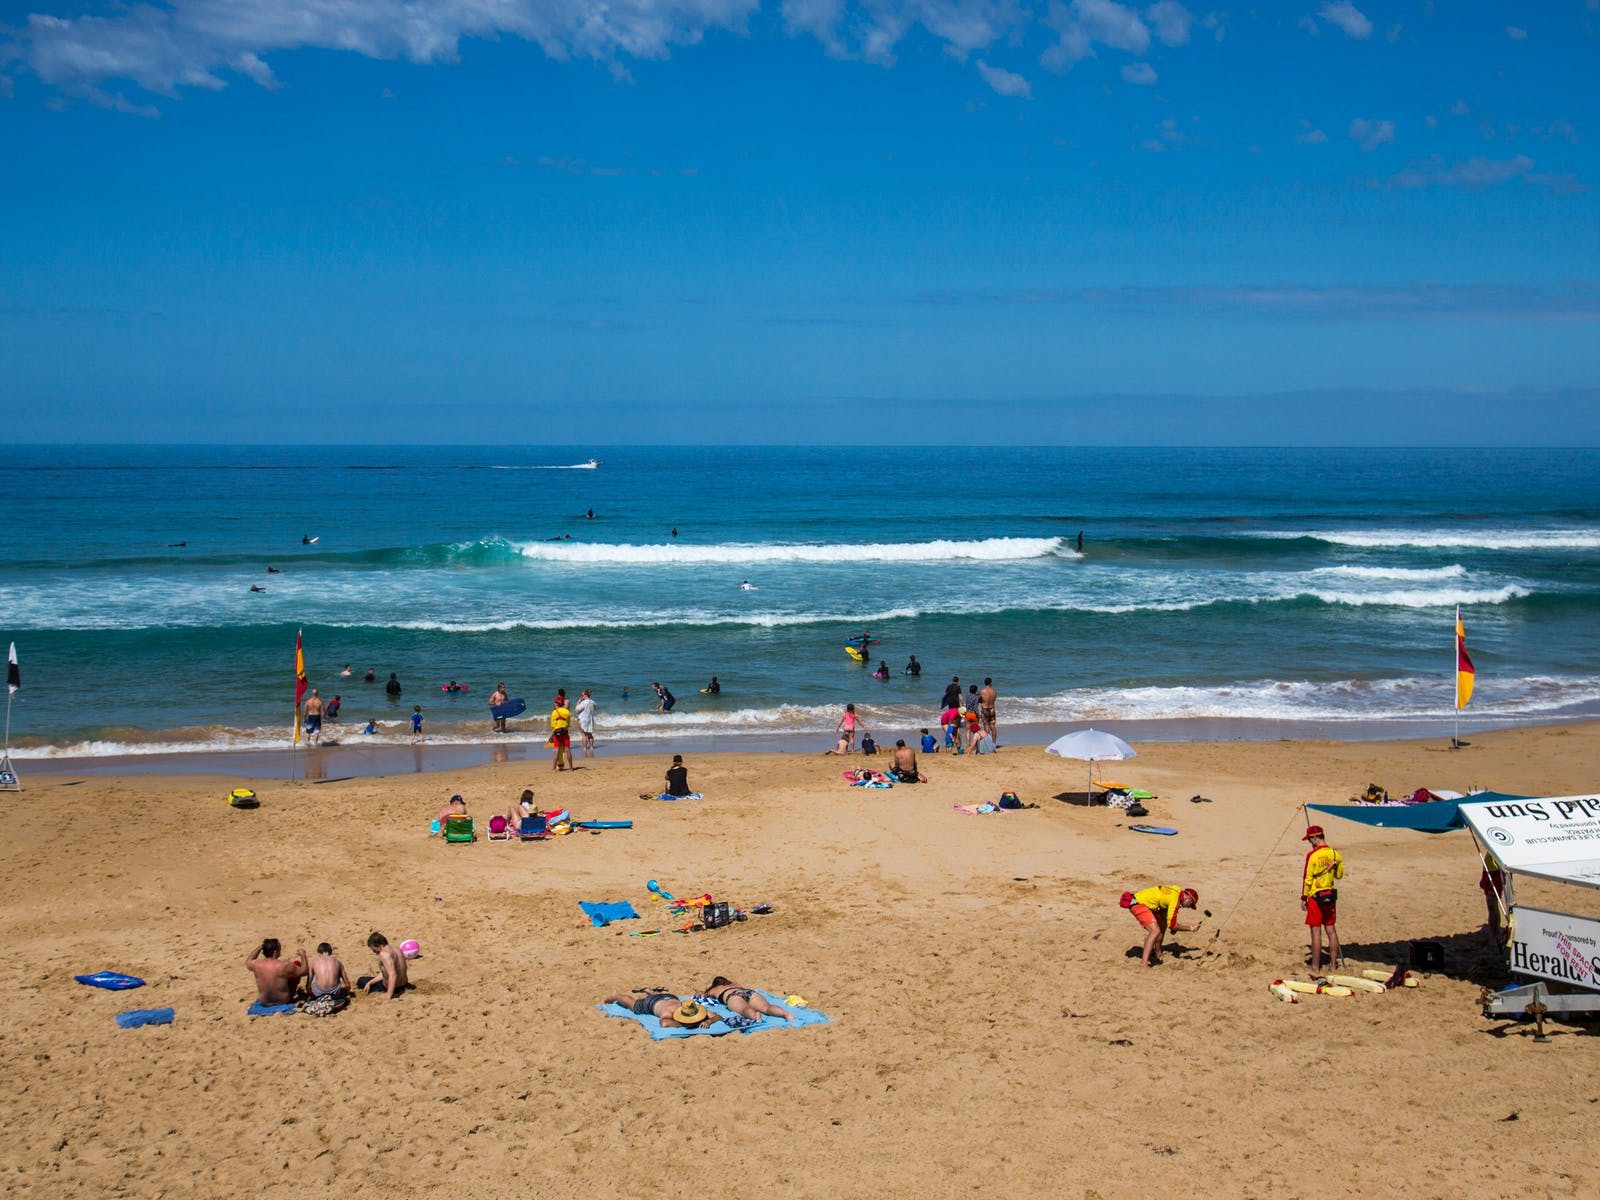 Lifesavers, families and wide ranges of people lounge and swim on Gunnamatta beach.